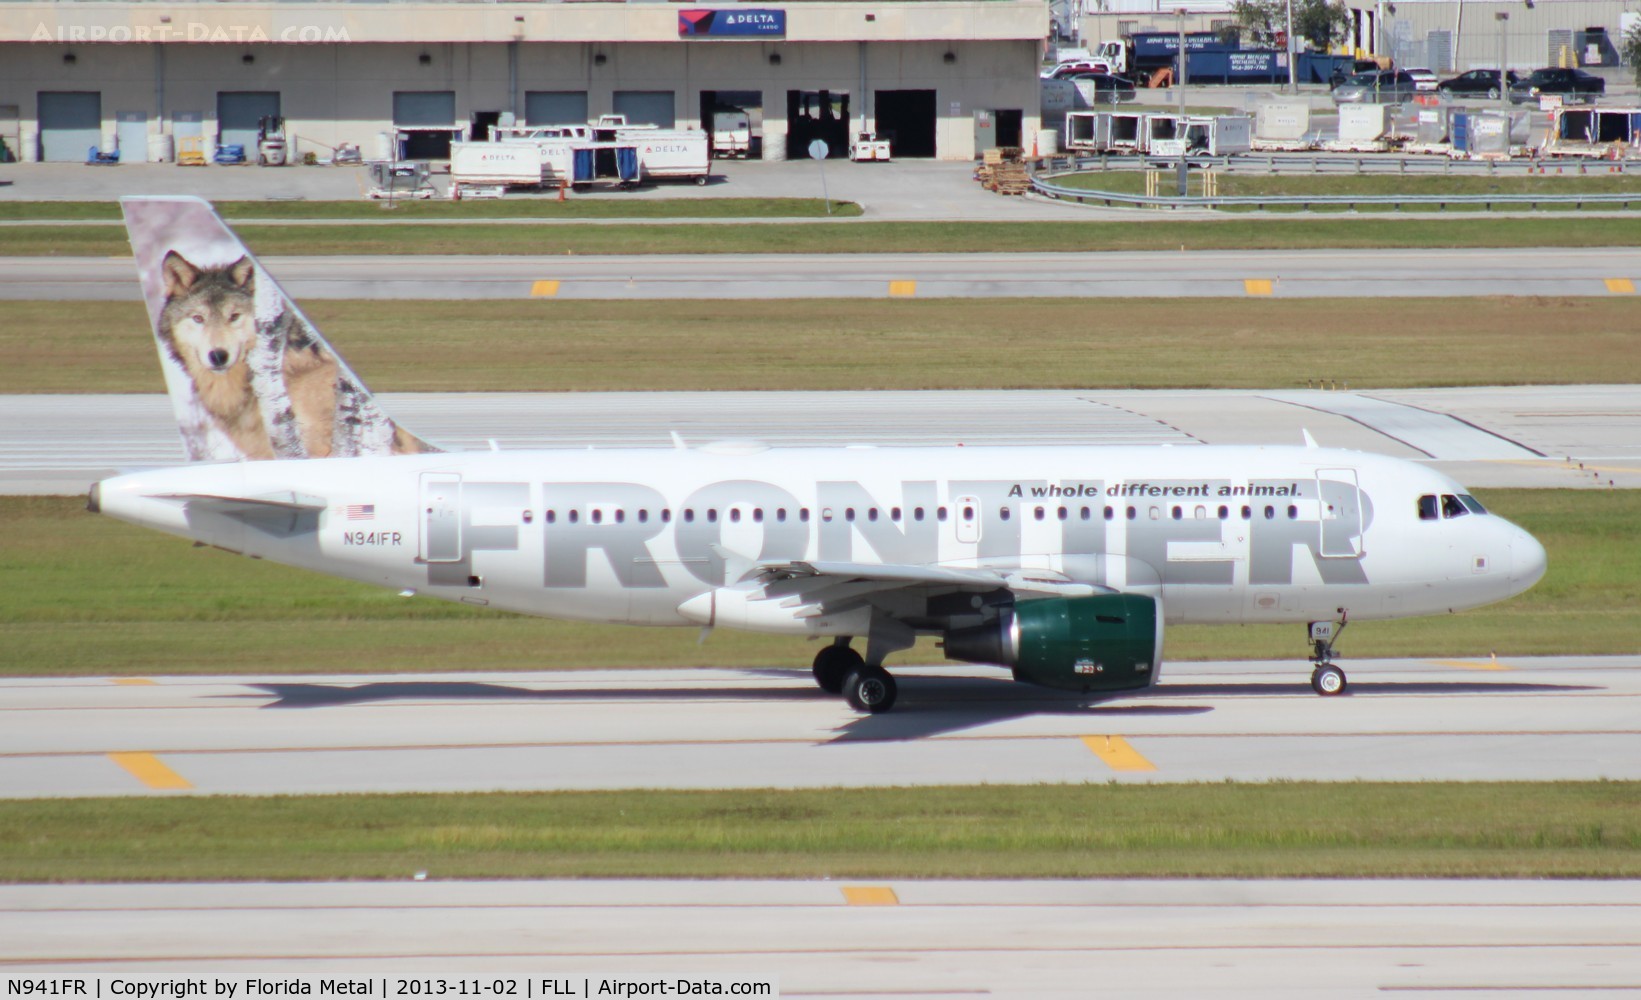 N941FR, 2005 Airbus A319-112 C/N 2483, Frontier A319 Lobo the Gray Wolf